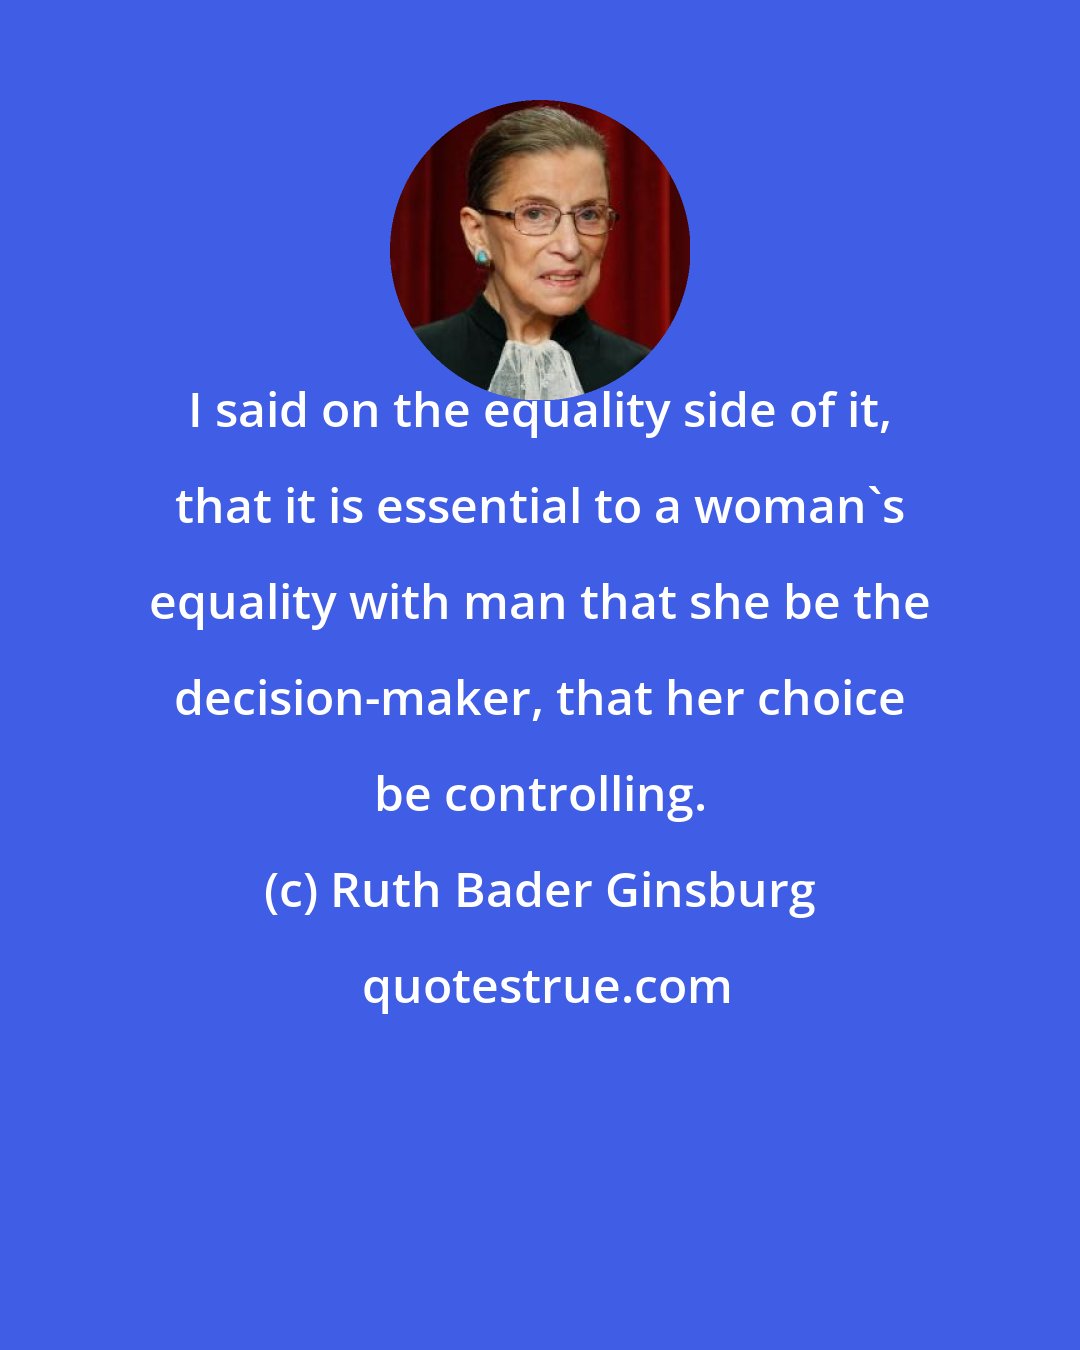 Ruth Bader Ginsburg: I said on the equality side of it, that it is essential to a woman's equality with man that she be the decision-maker, that her choice be controlling.